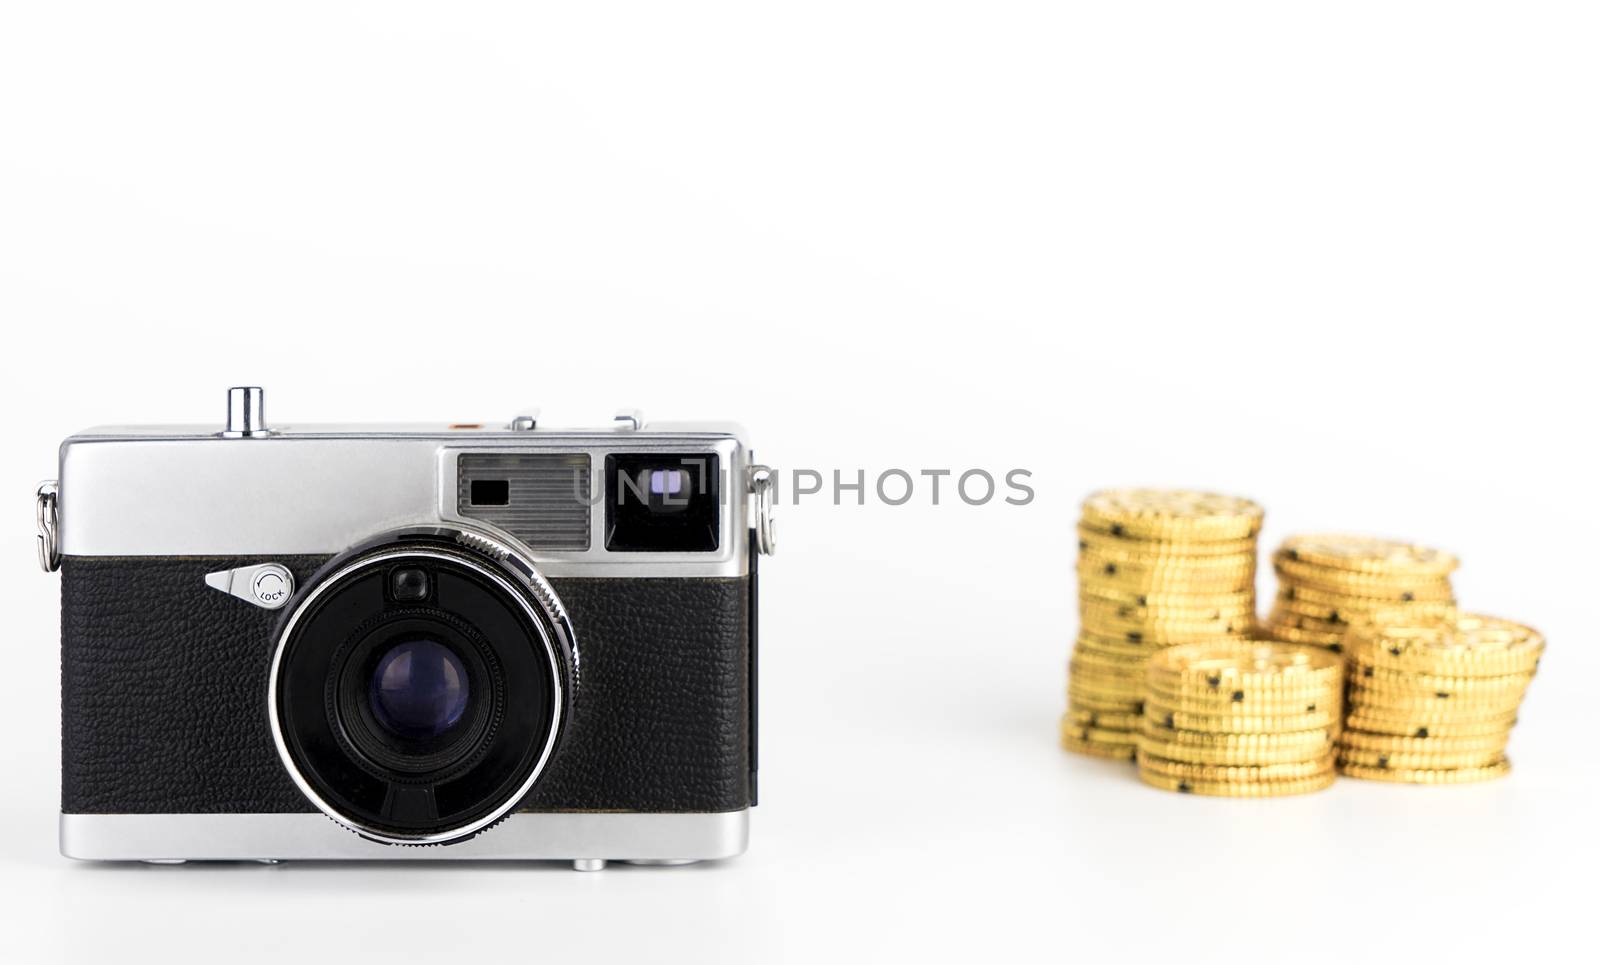 Making money from camera photography idea on white background by junce